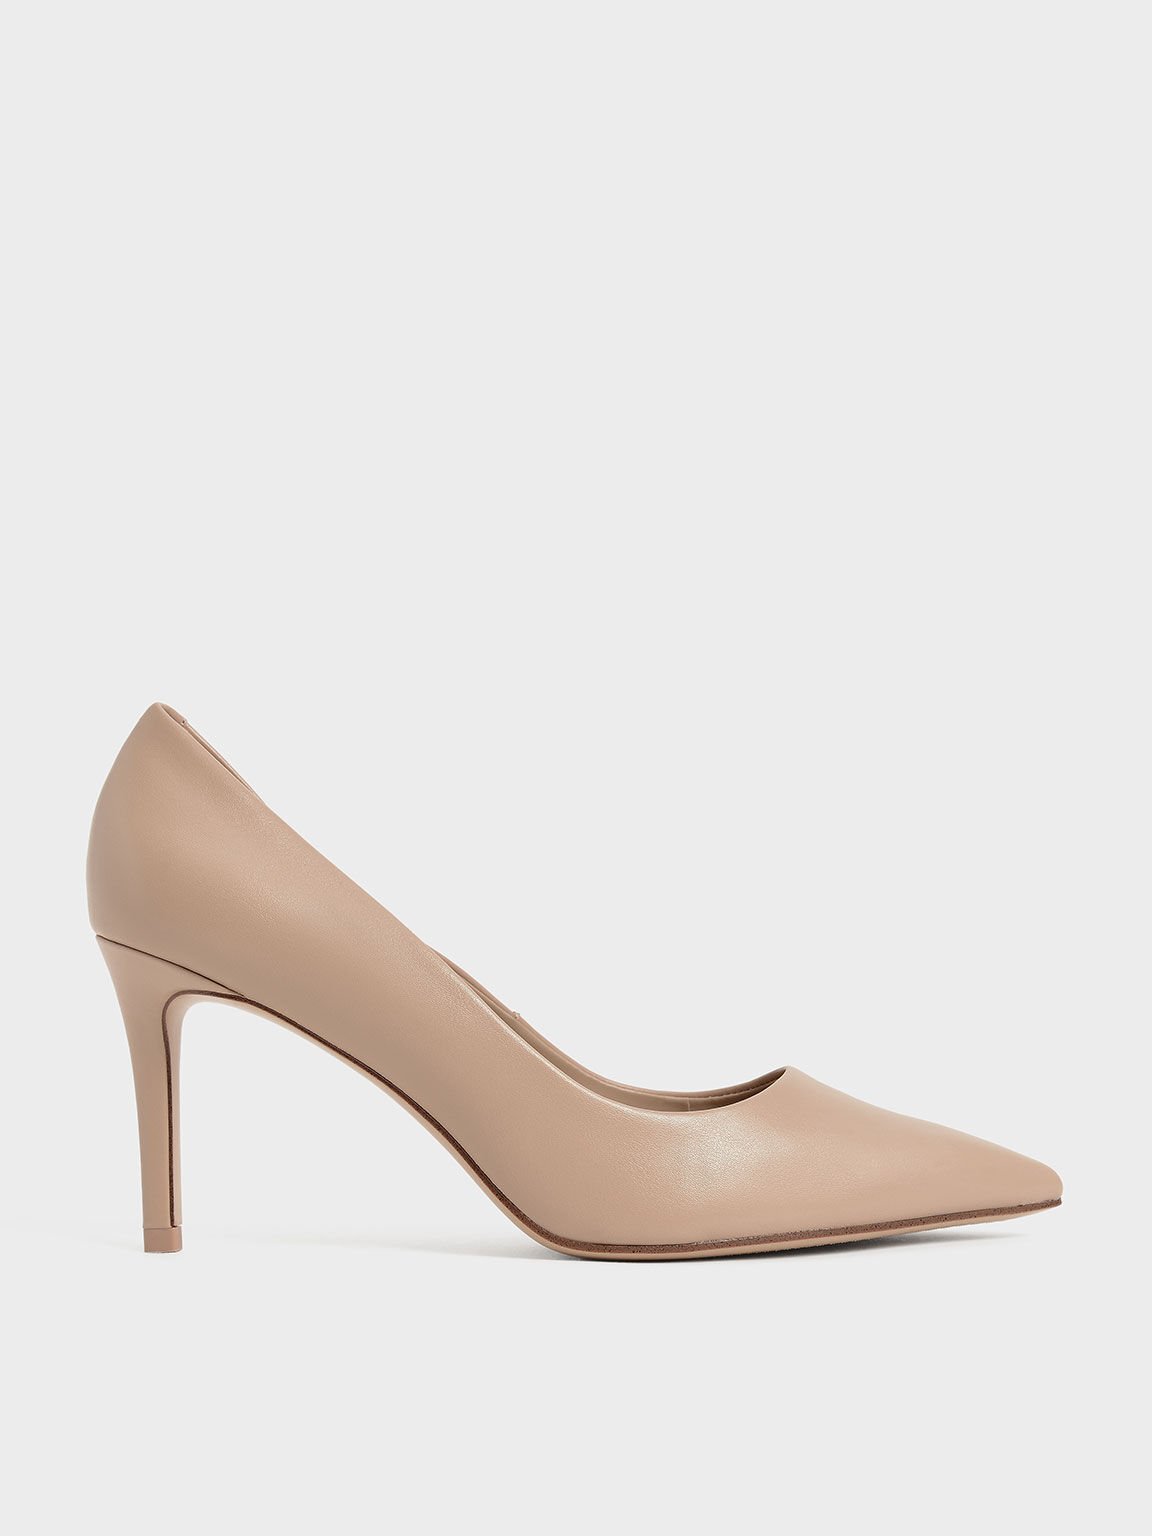 Nude Pointed Toe Stiletto Pumps - CHARLES & KEITH BH